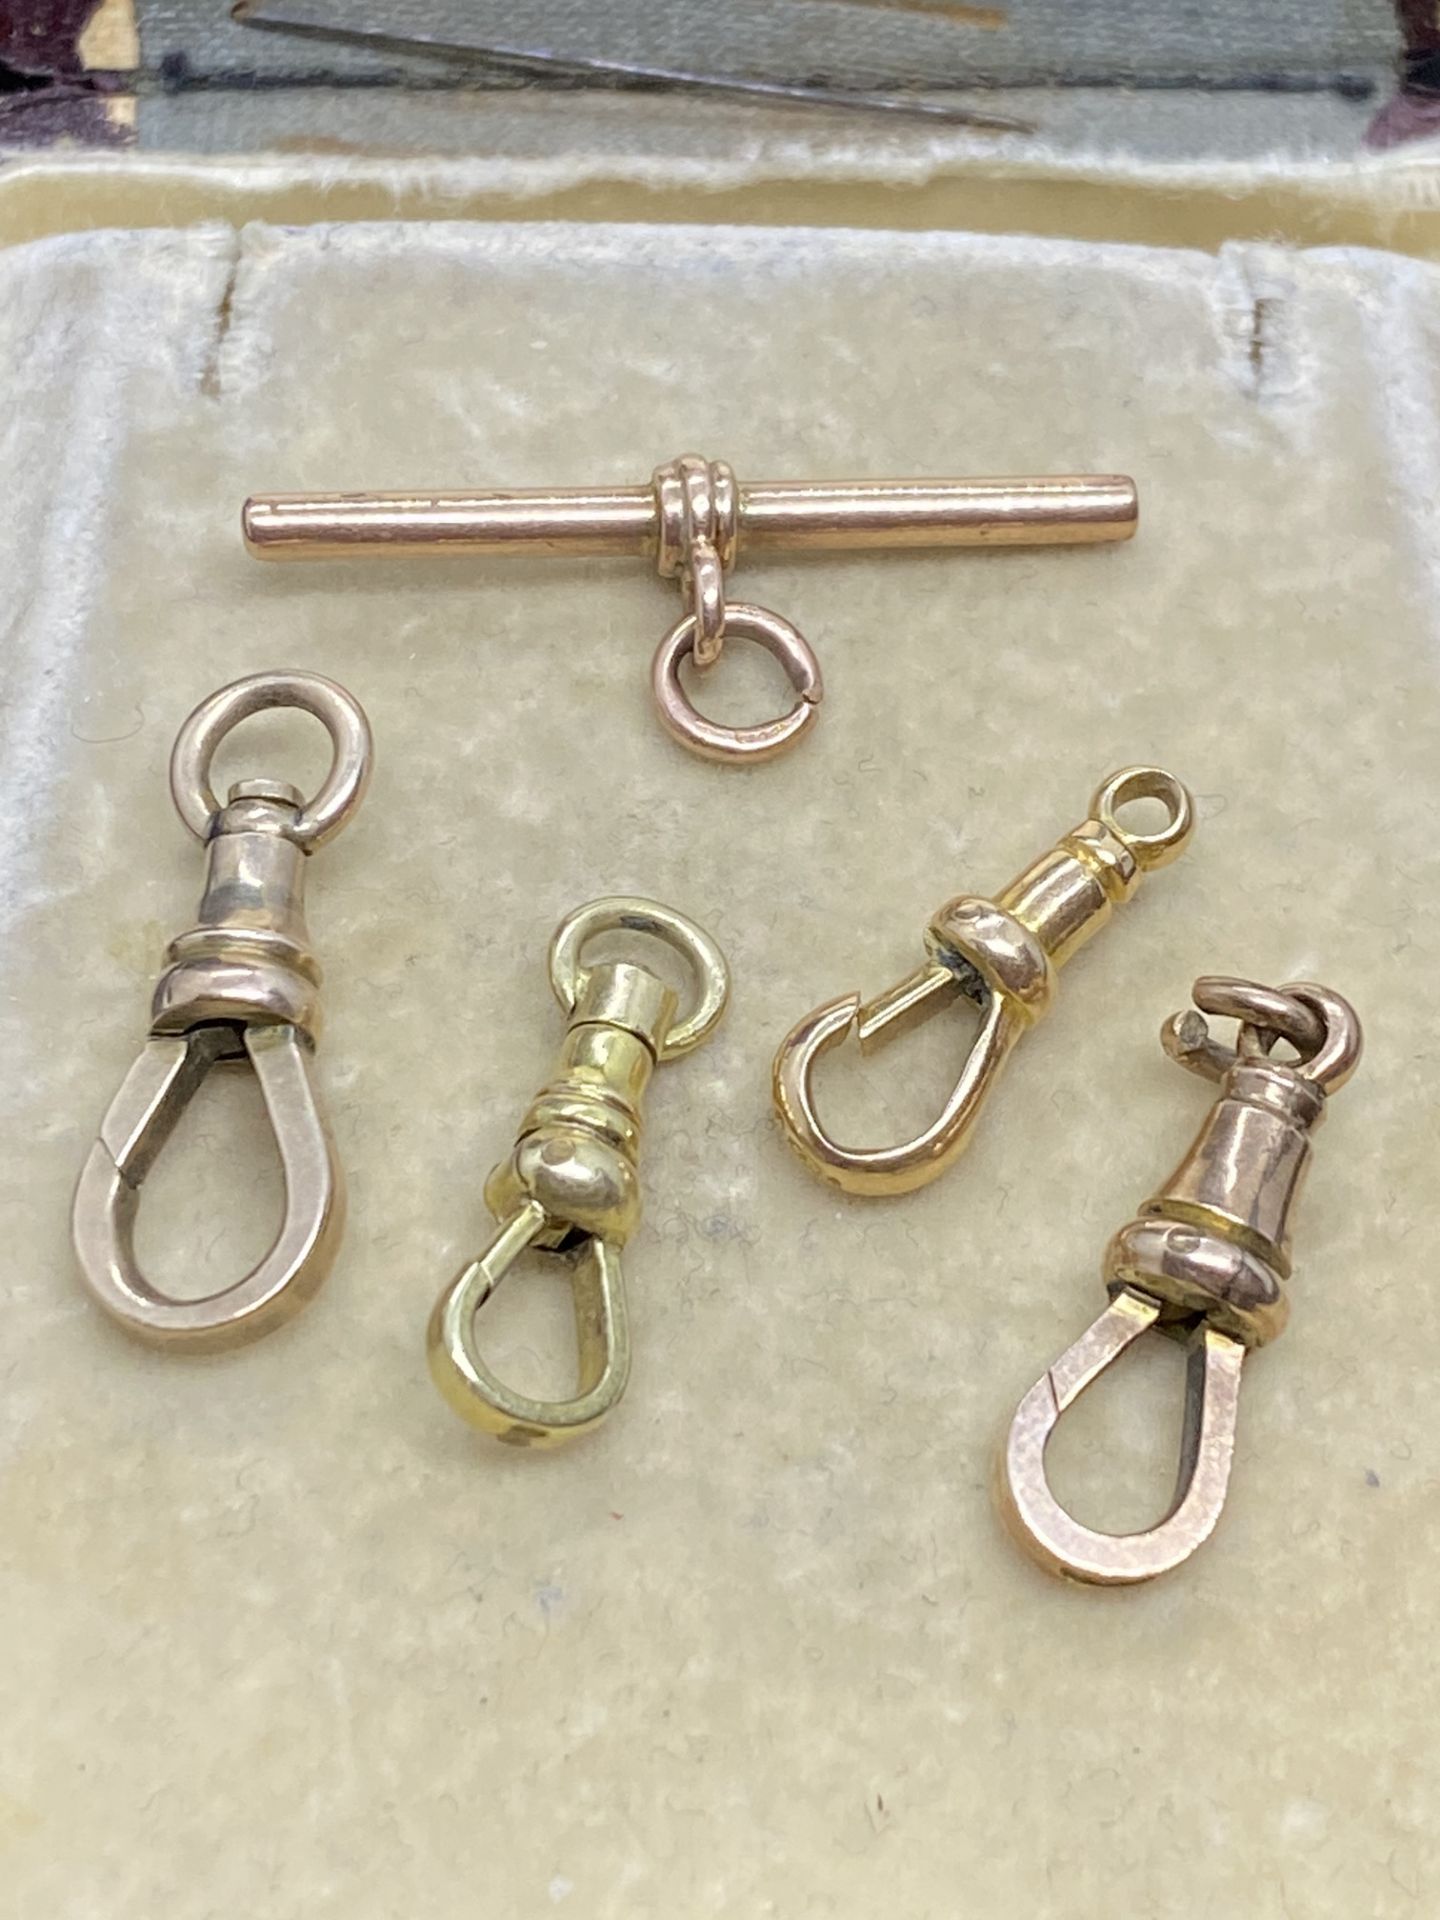 4 x 9ct GOLD CLASPS & T BAR - Image 2 of 2